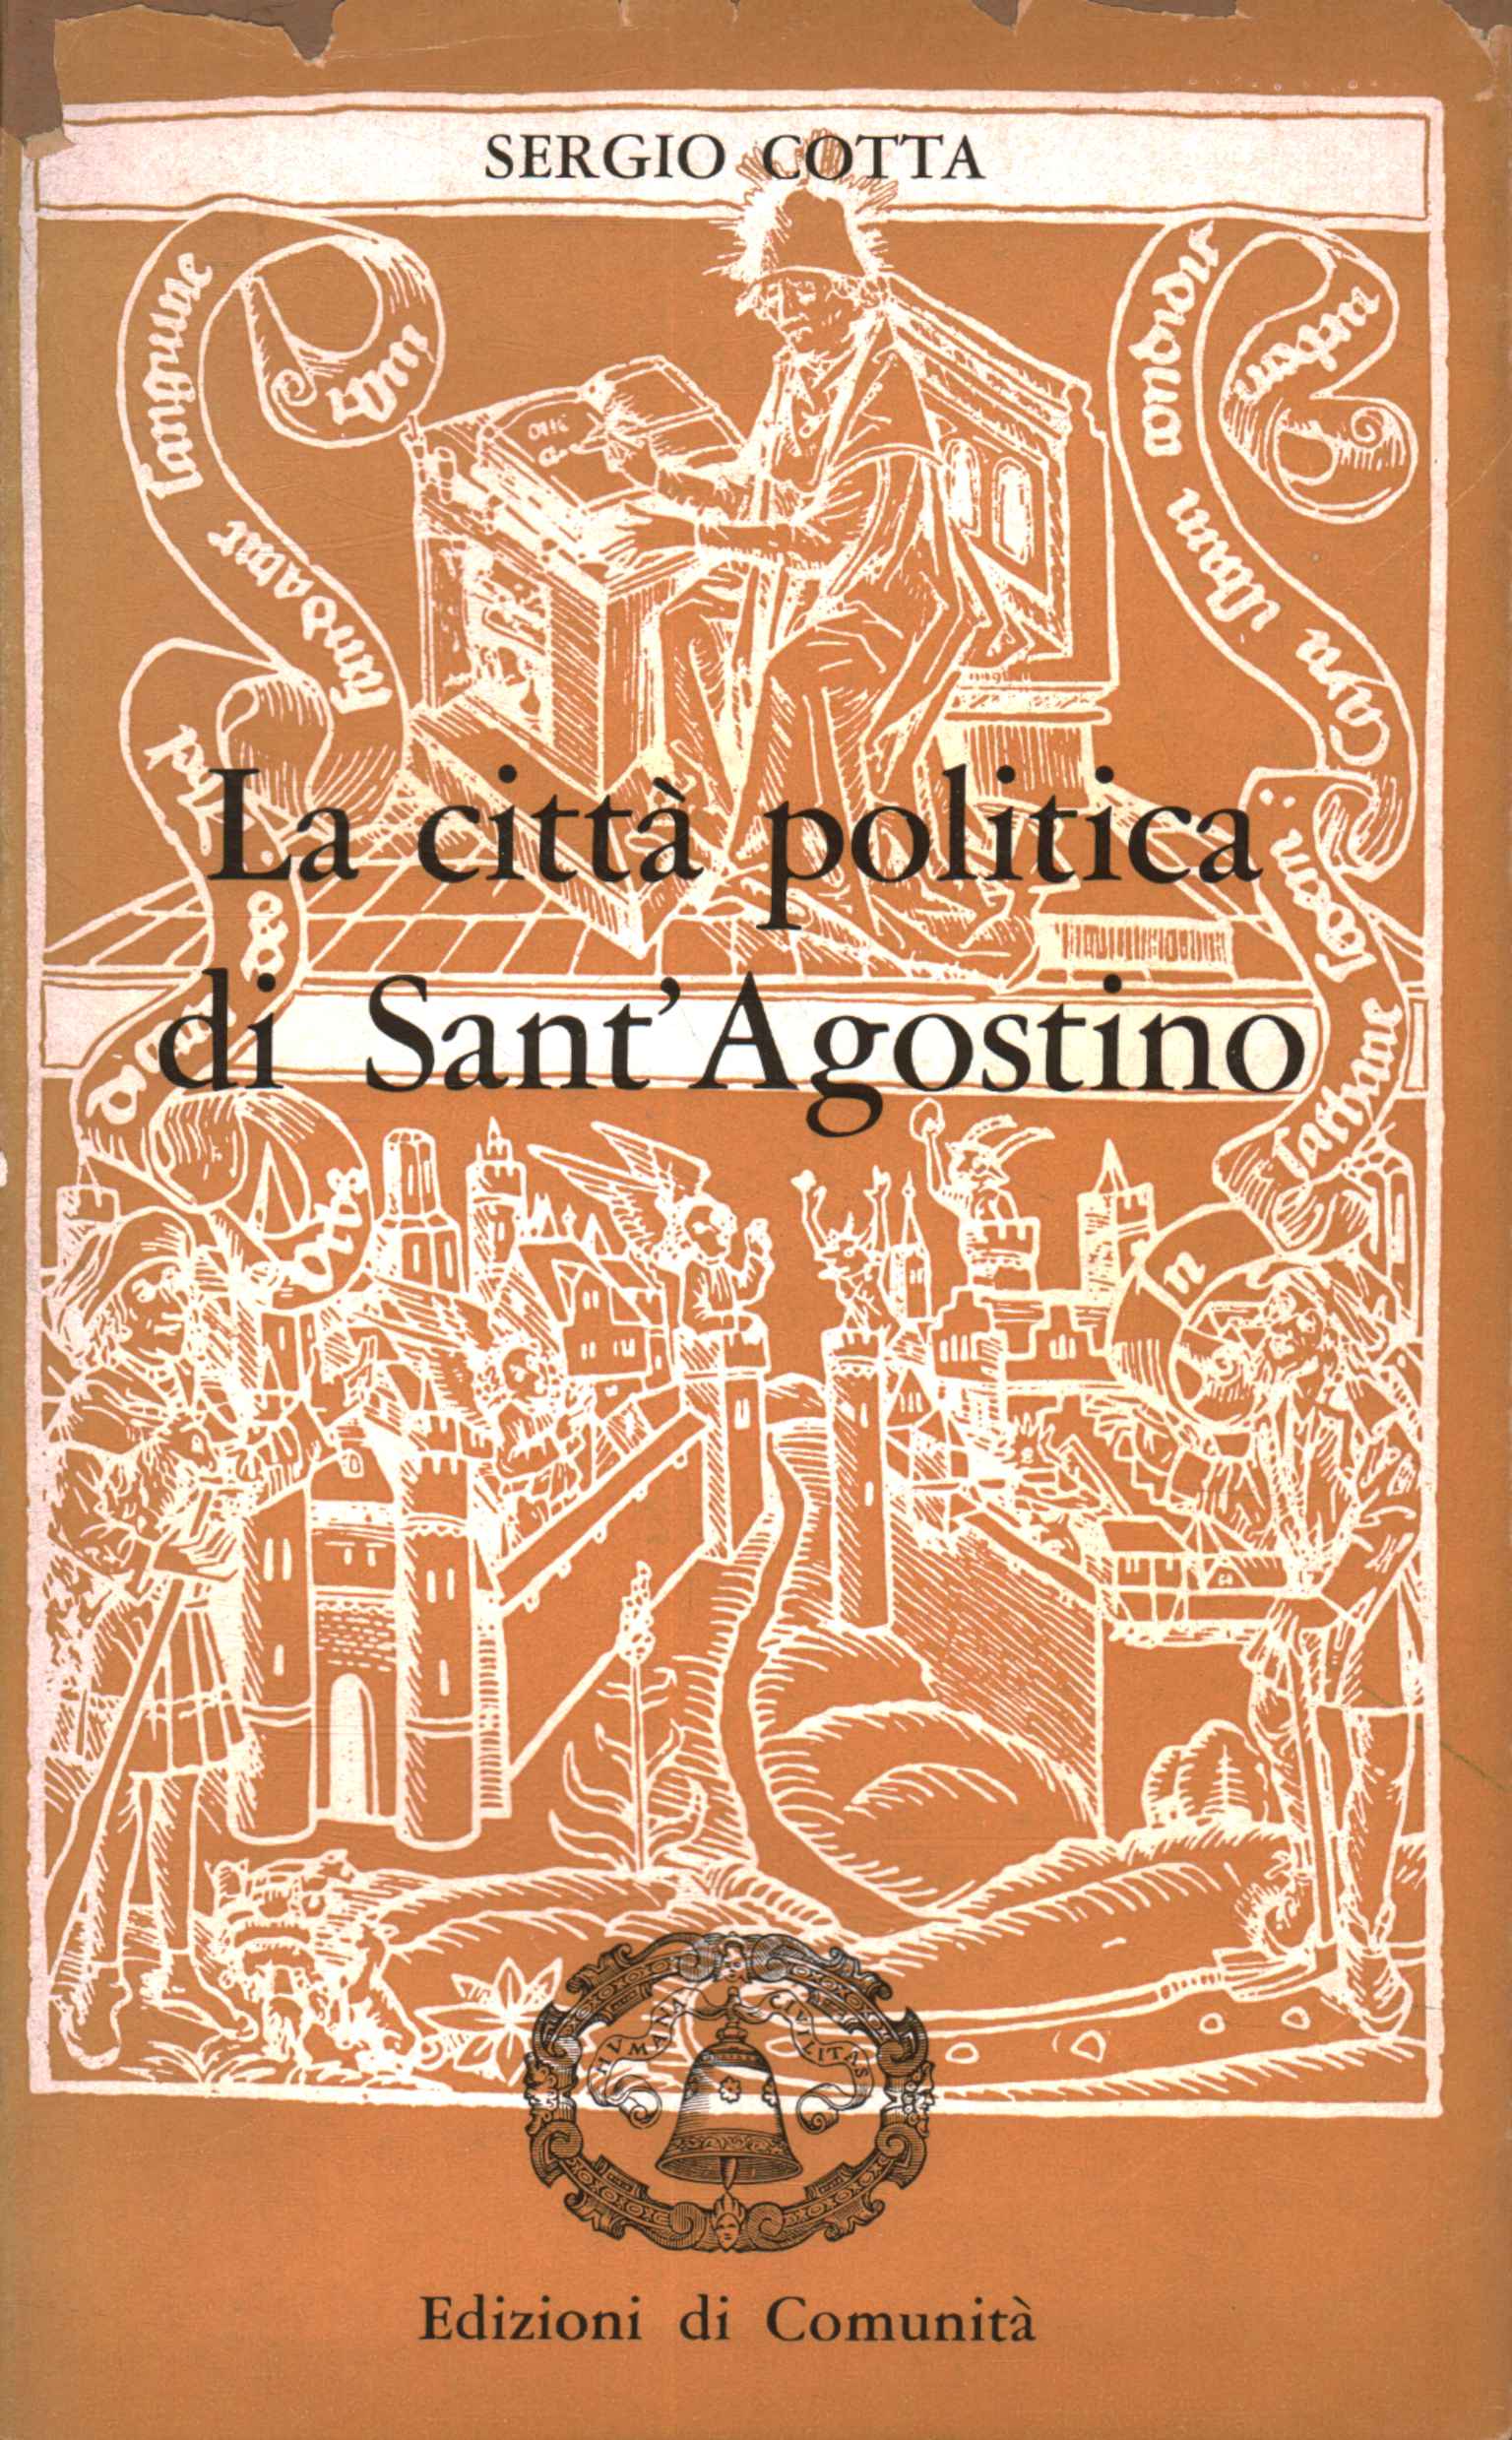 The political city of Sant'